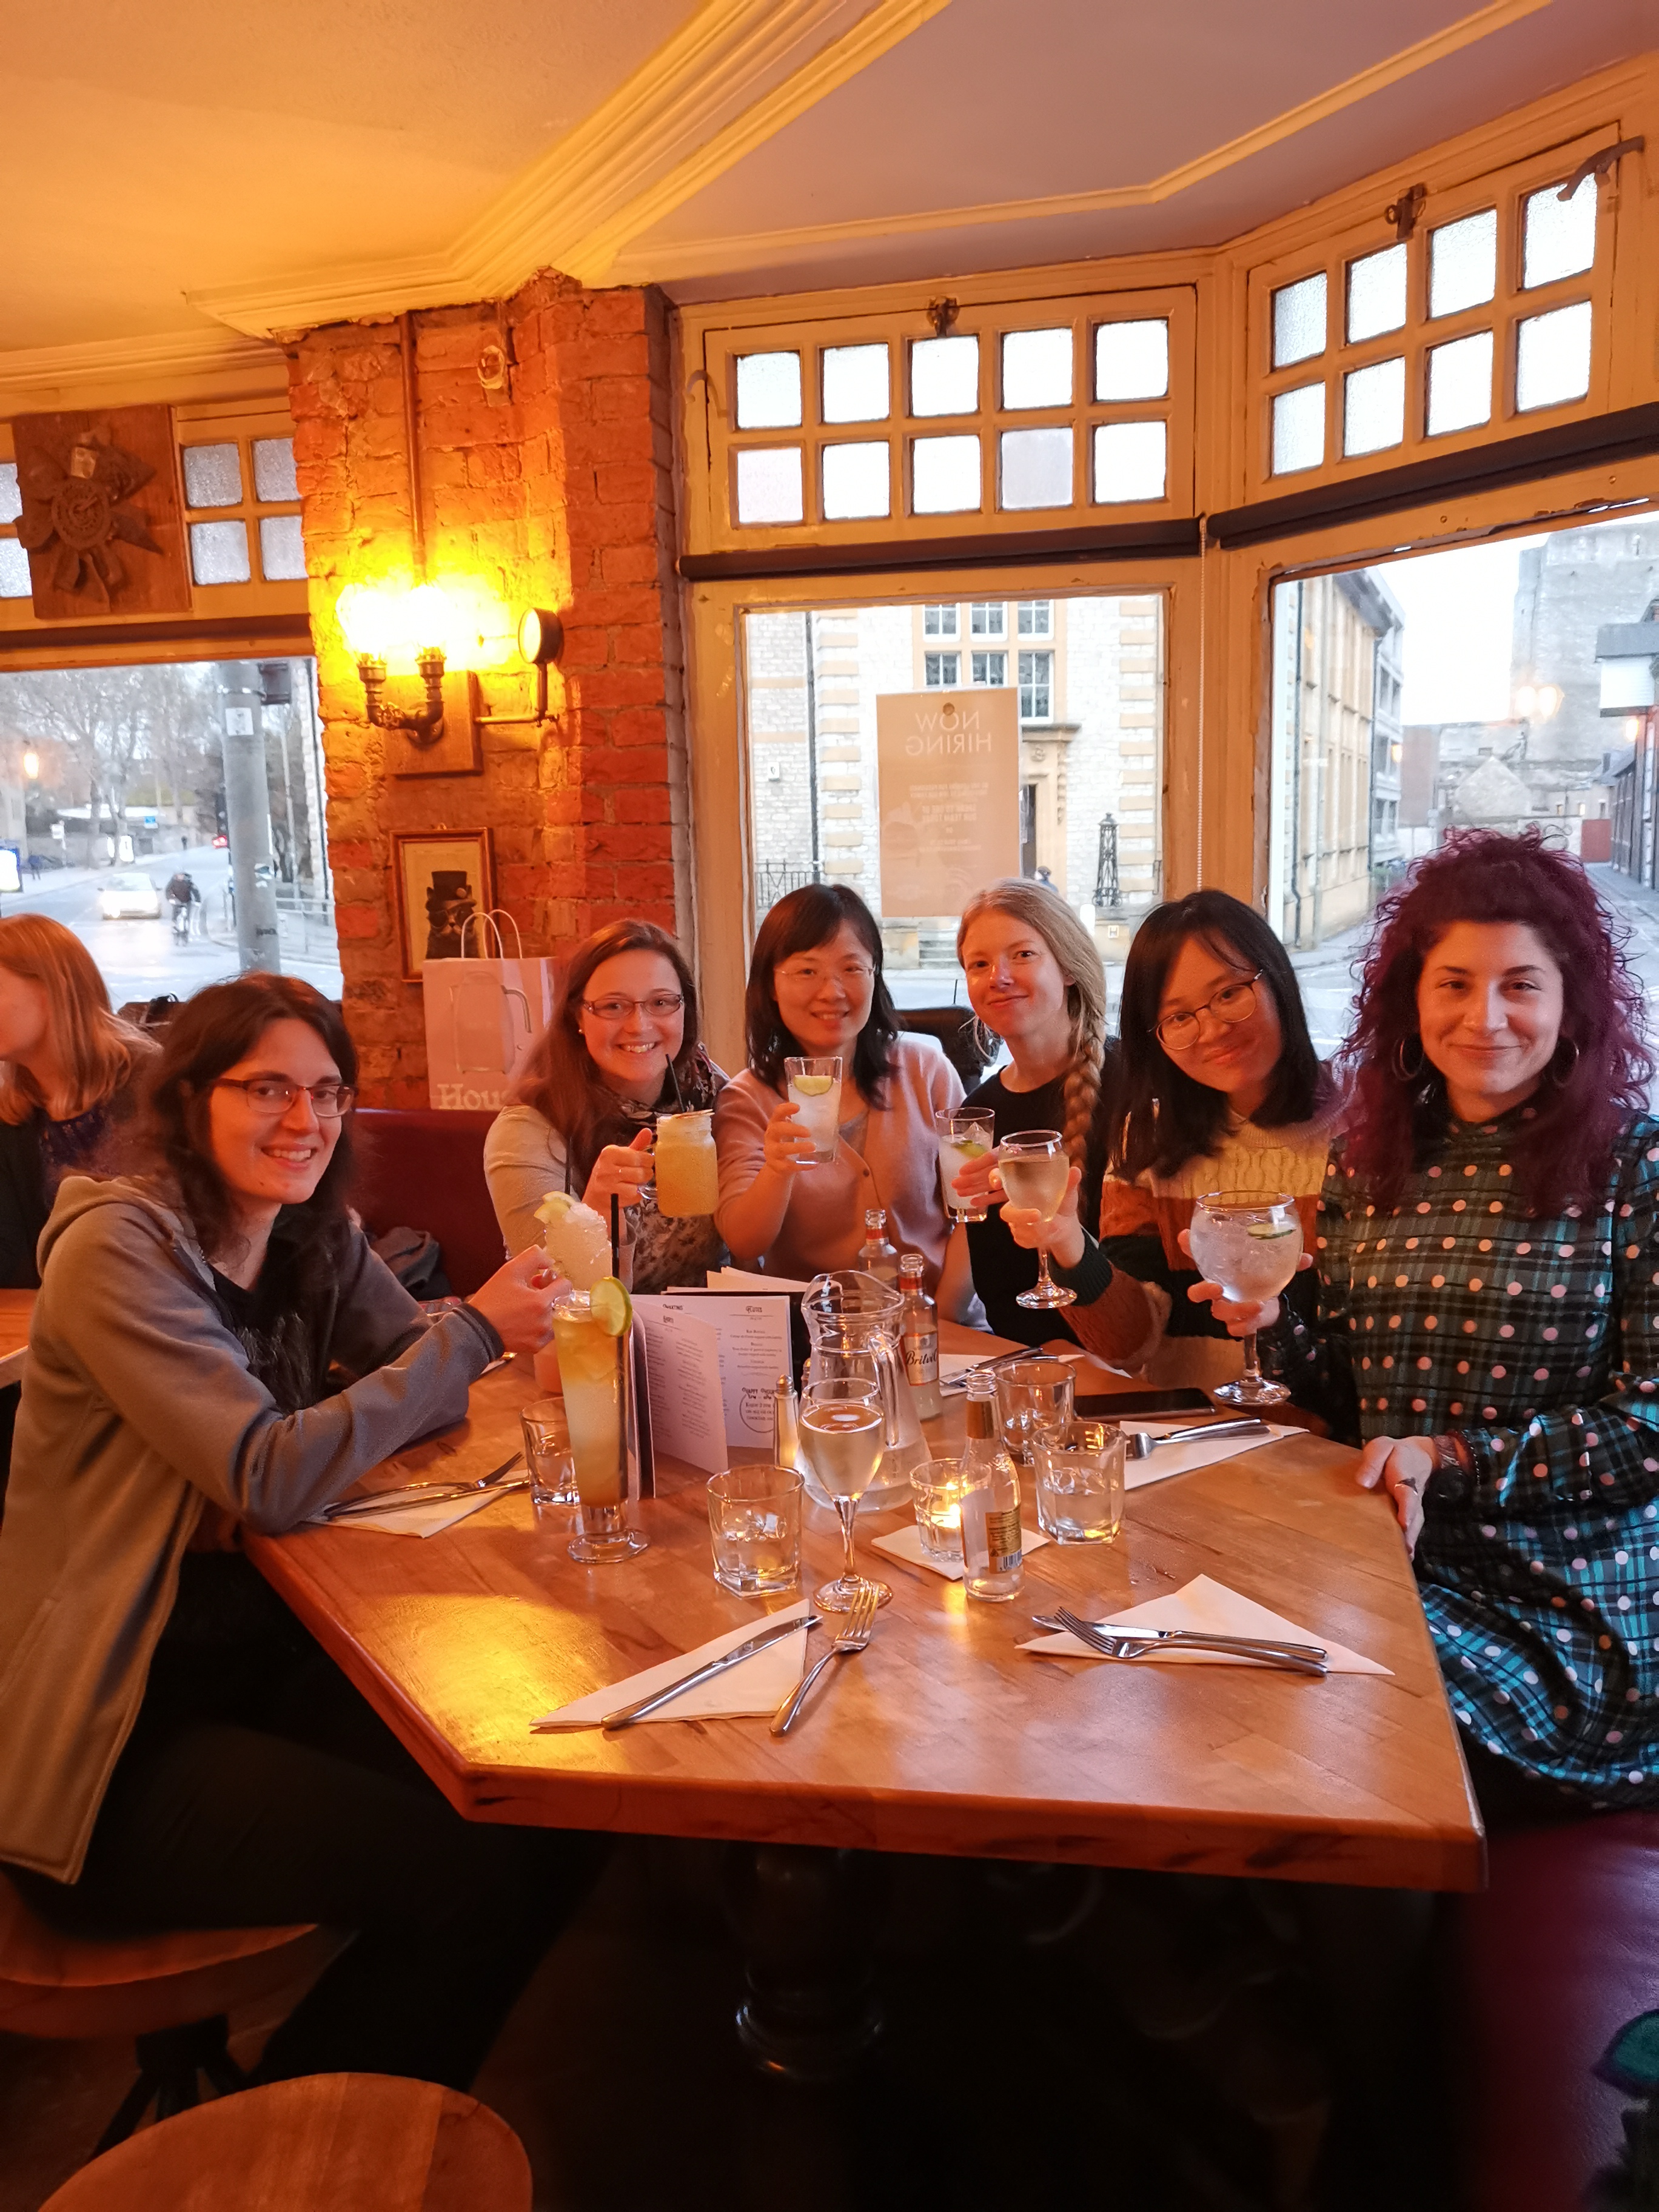 Cocktail hour at The Lighthouse Cocktail Bar in Oxford (from the left: Anne W, Coline, Ying, Adrija, Jinuy, Despoina), Group retreat 2019.